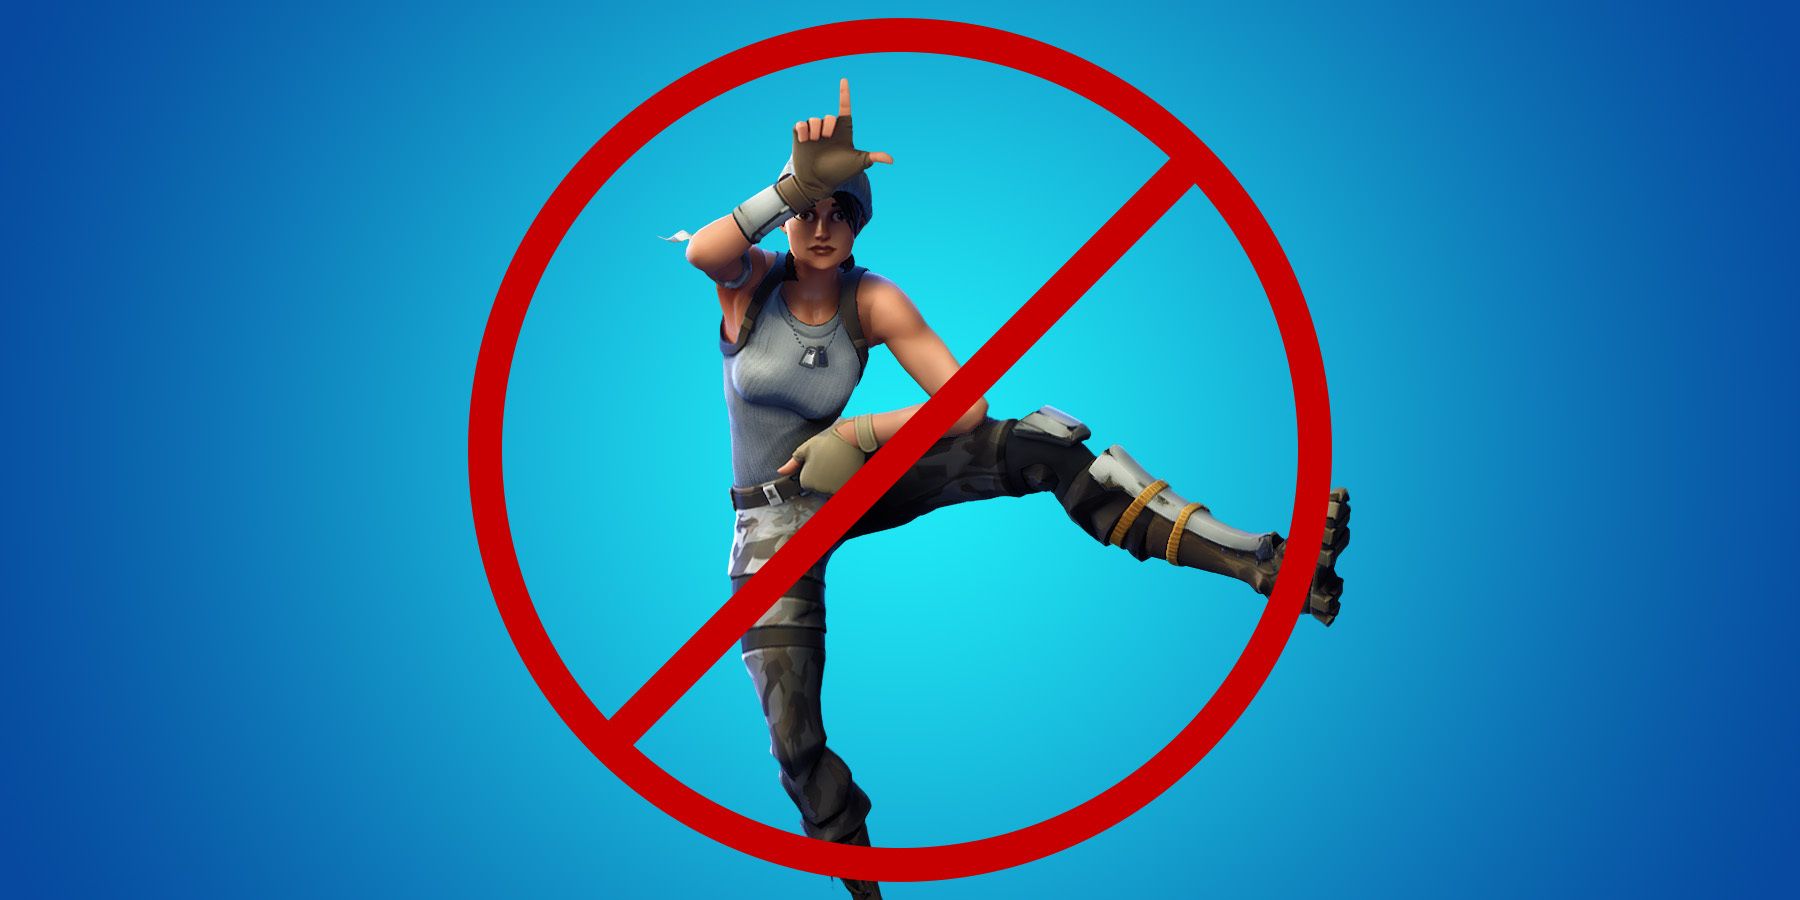 fortnite-l-emote-with-prohibited-symbol-game-rant